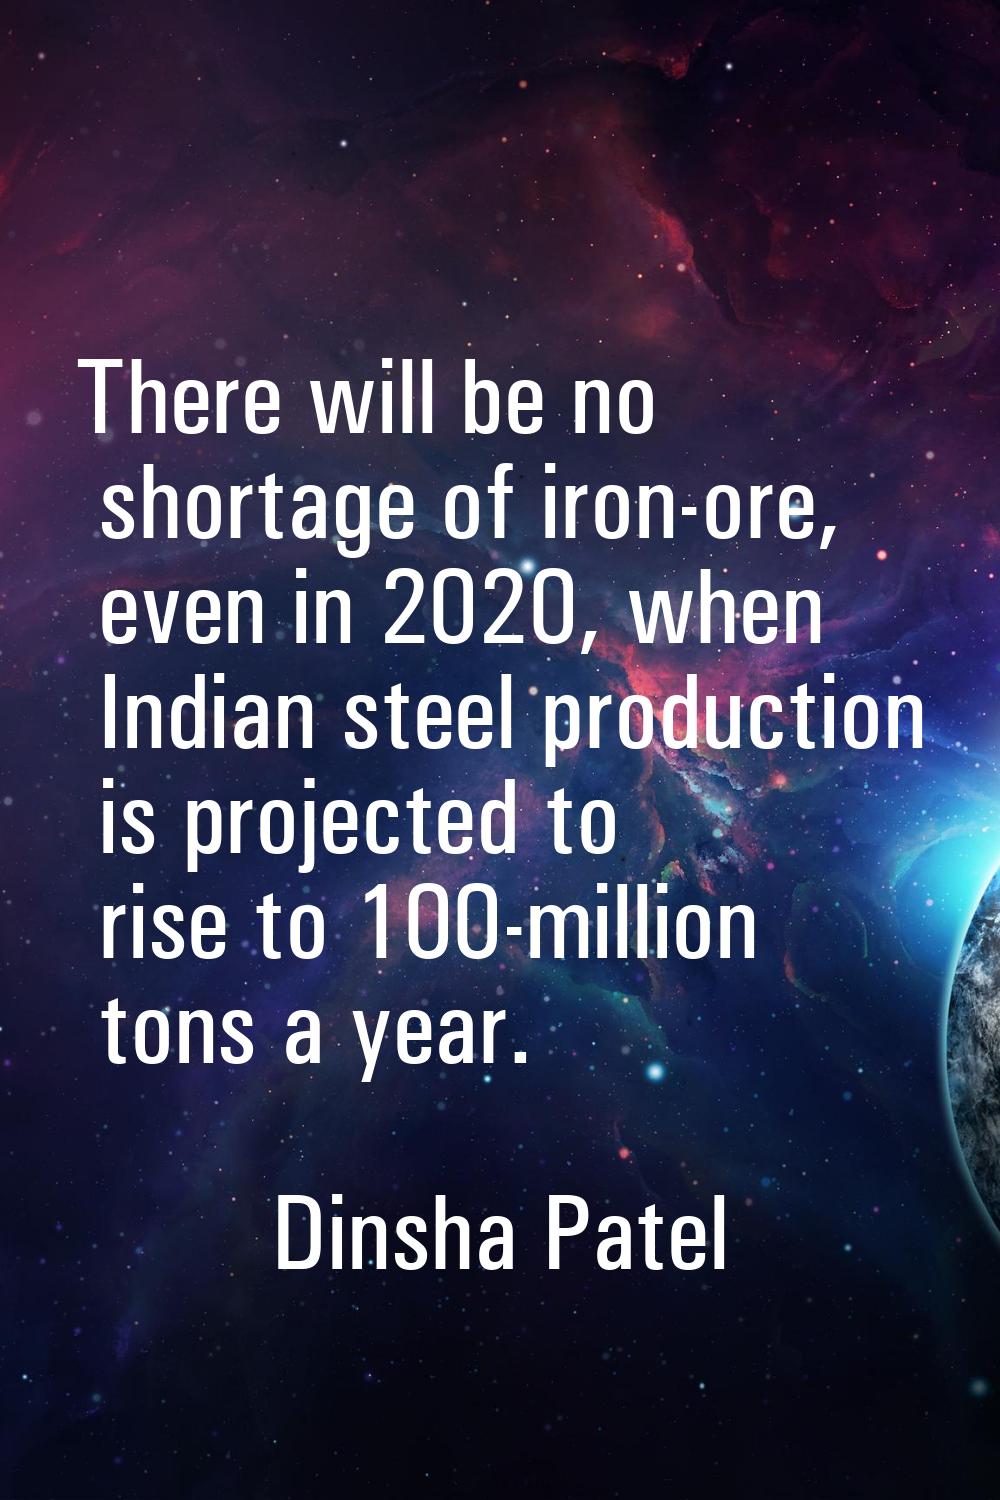 There will be no shortage of iron-ore, even in 2020, when Indian steel production is projected to r